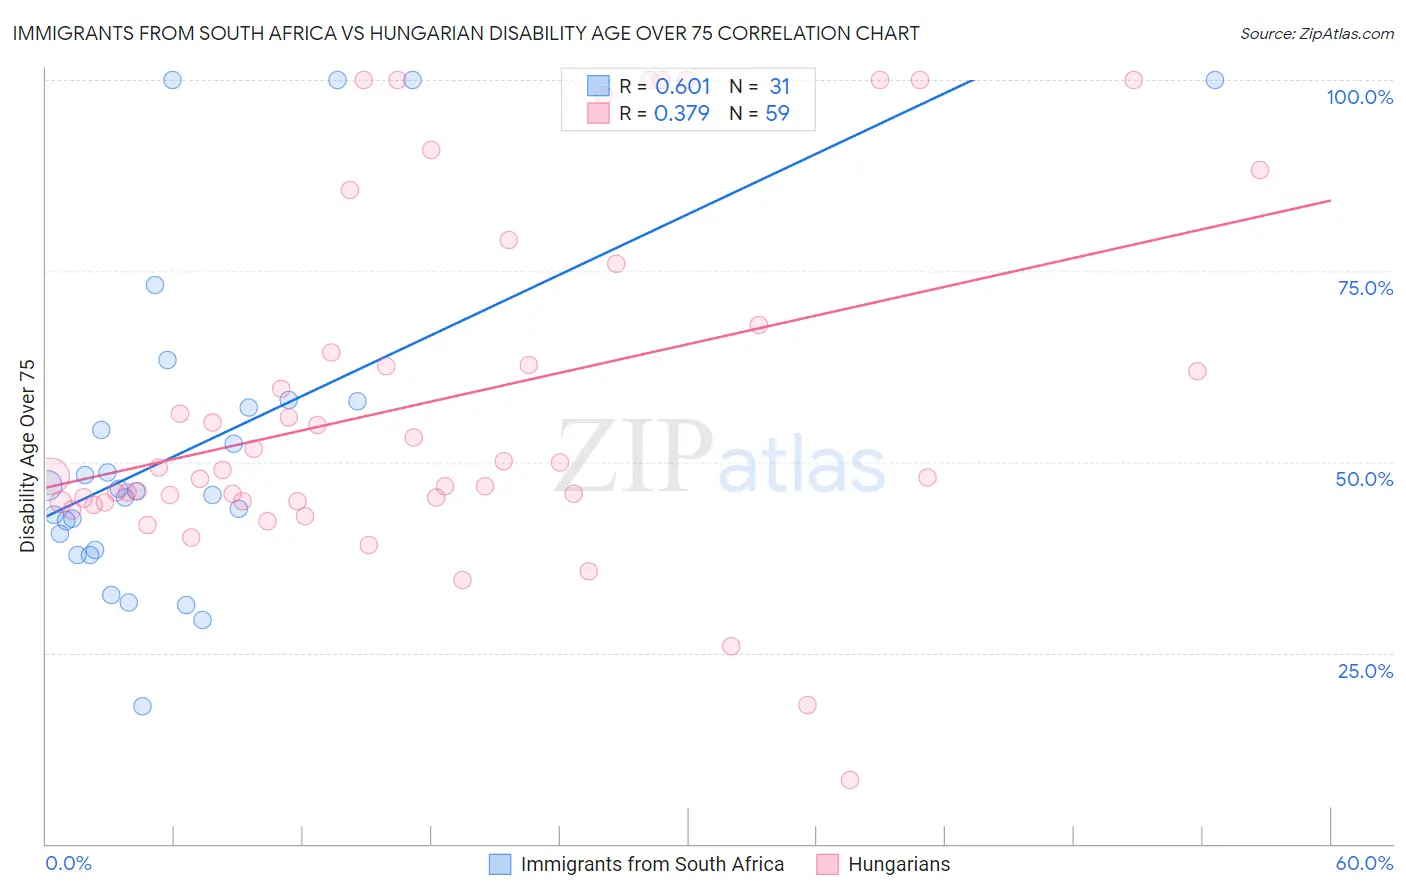 Immigrants from South Africa vs Hungarian Disability Age Over 75